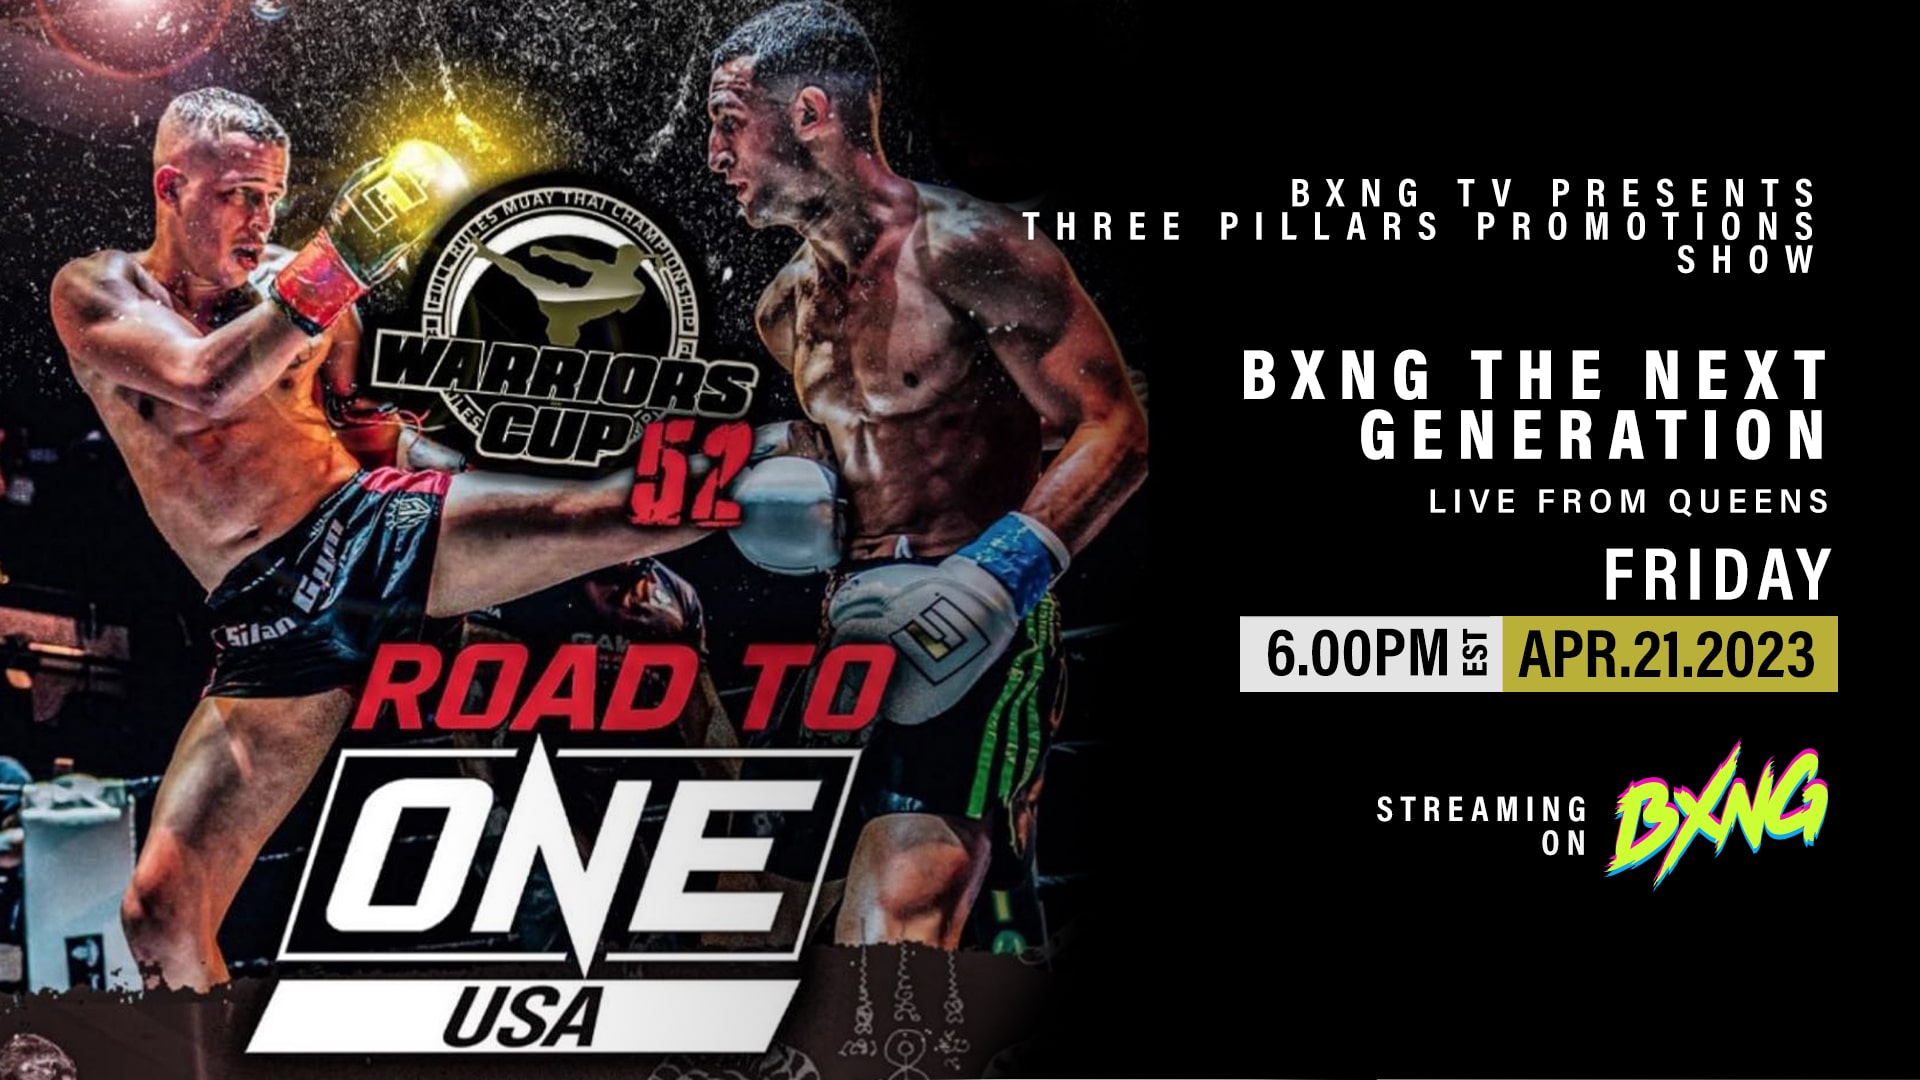 BXNG TV Presents Special Feature of Warriors Cup 52 - Road to One Show Live Stream 04/21/23